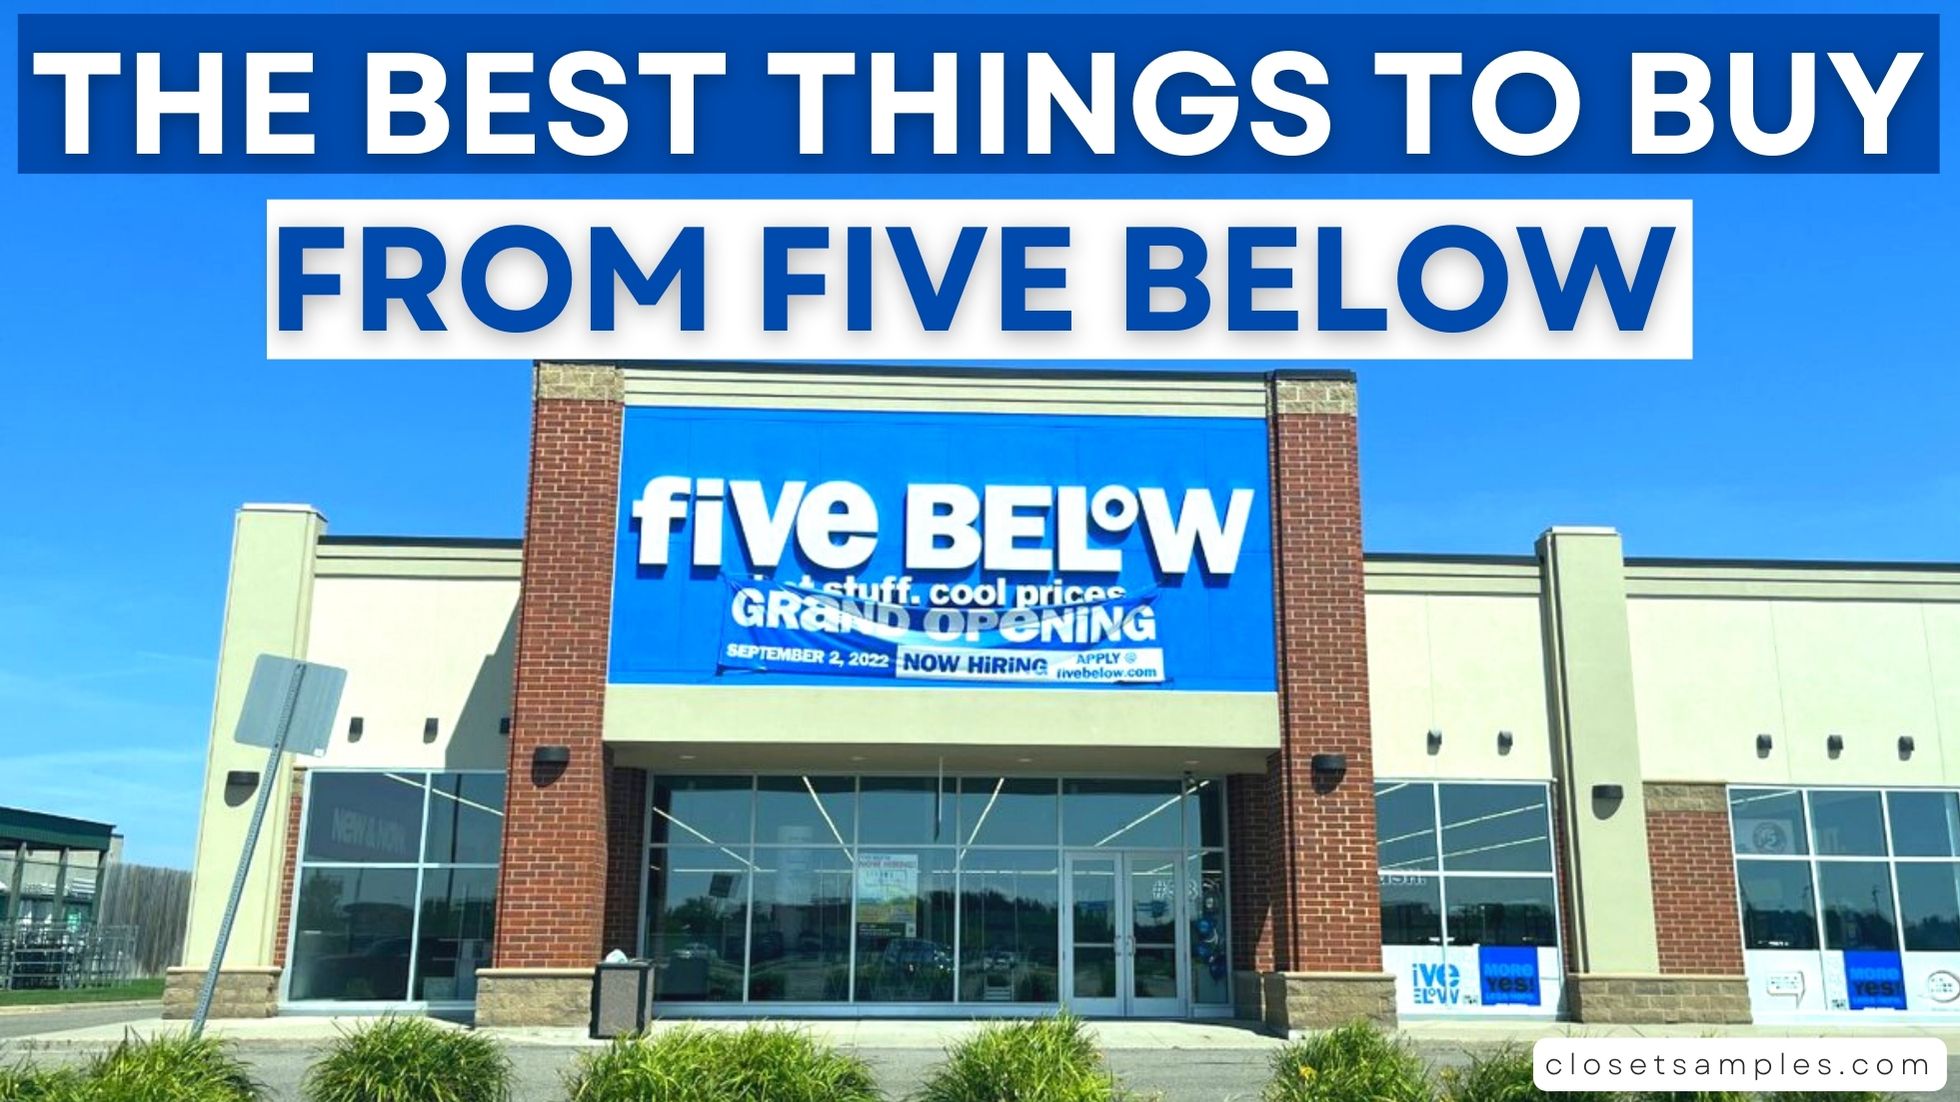 The Best Things to Buy from Five Below!